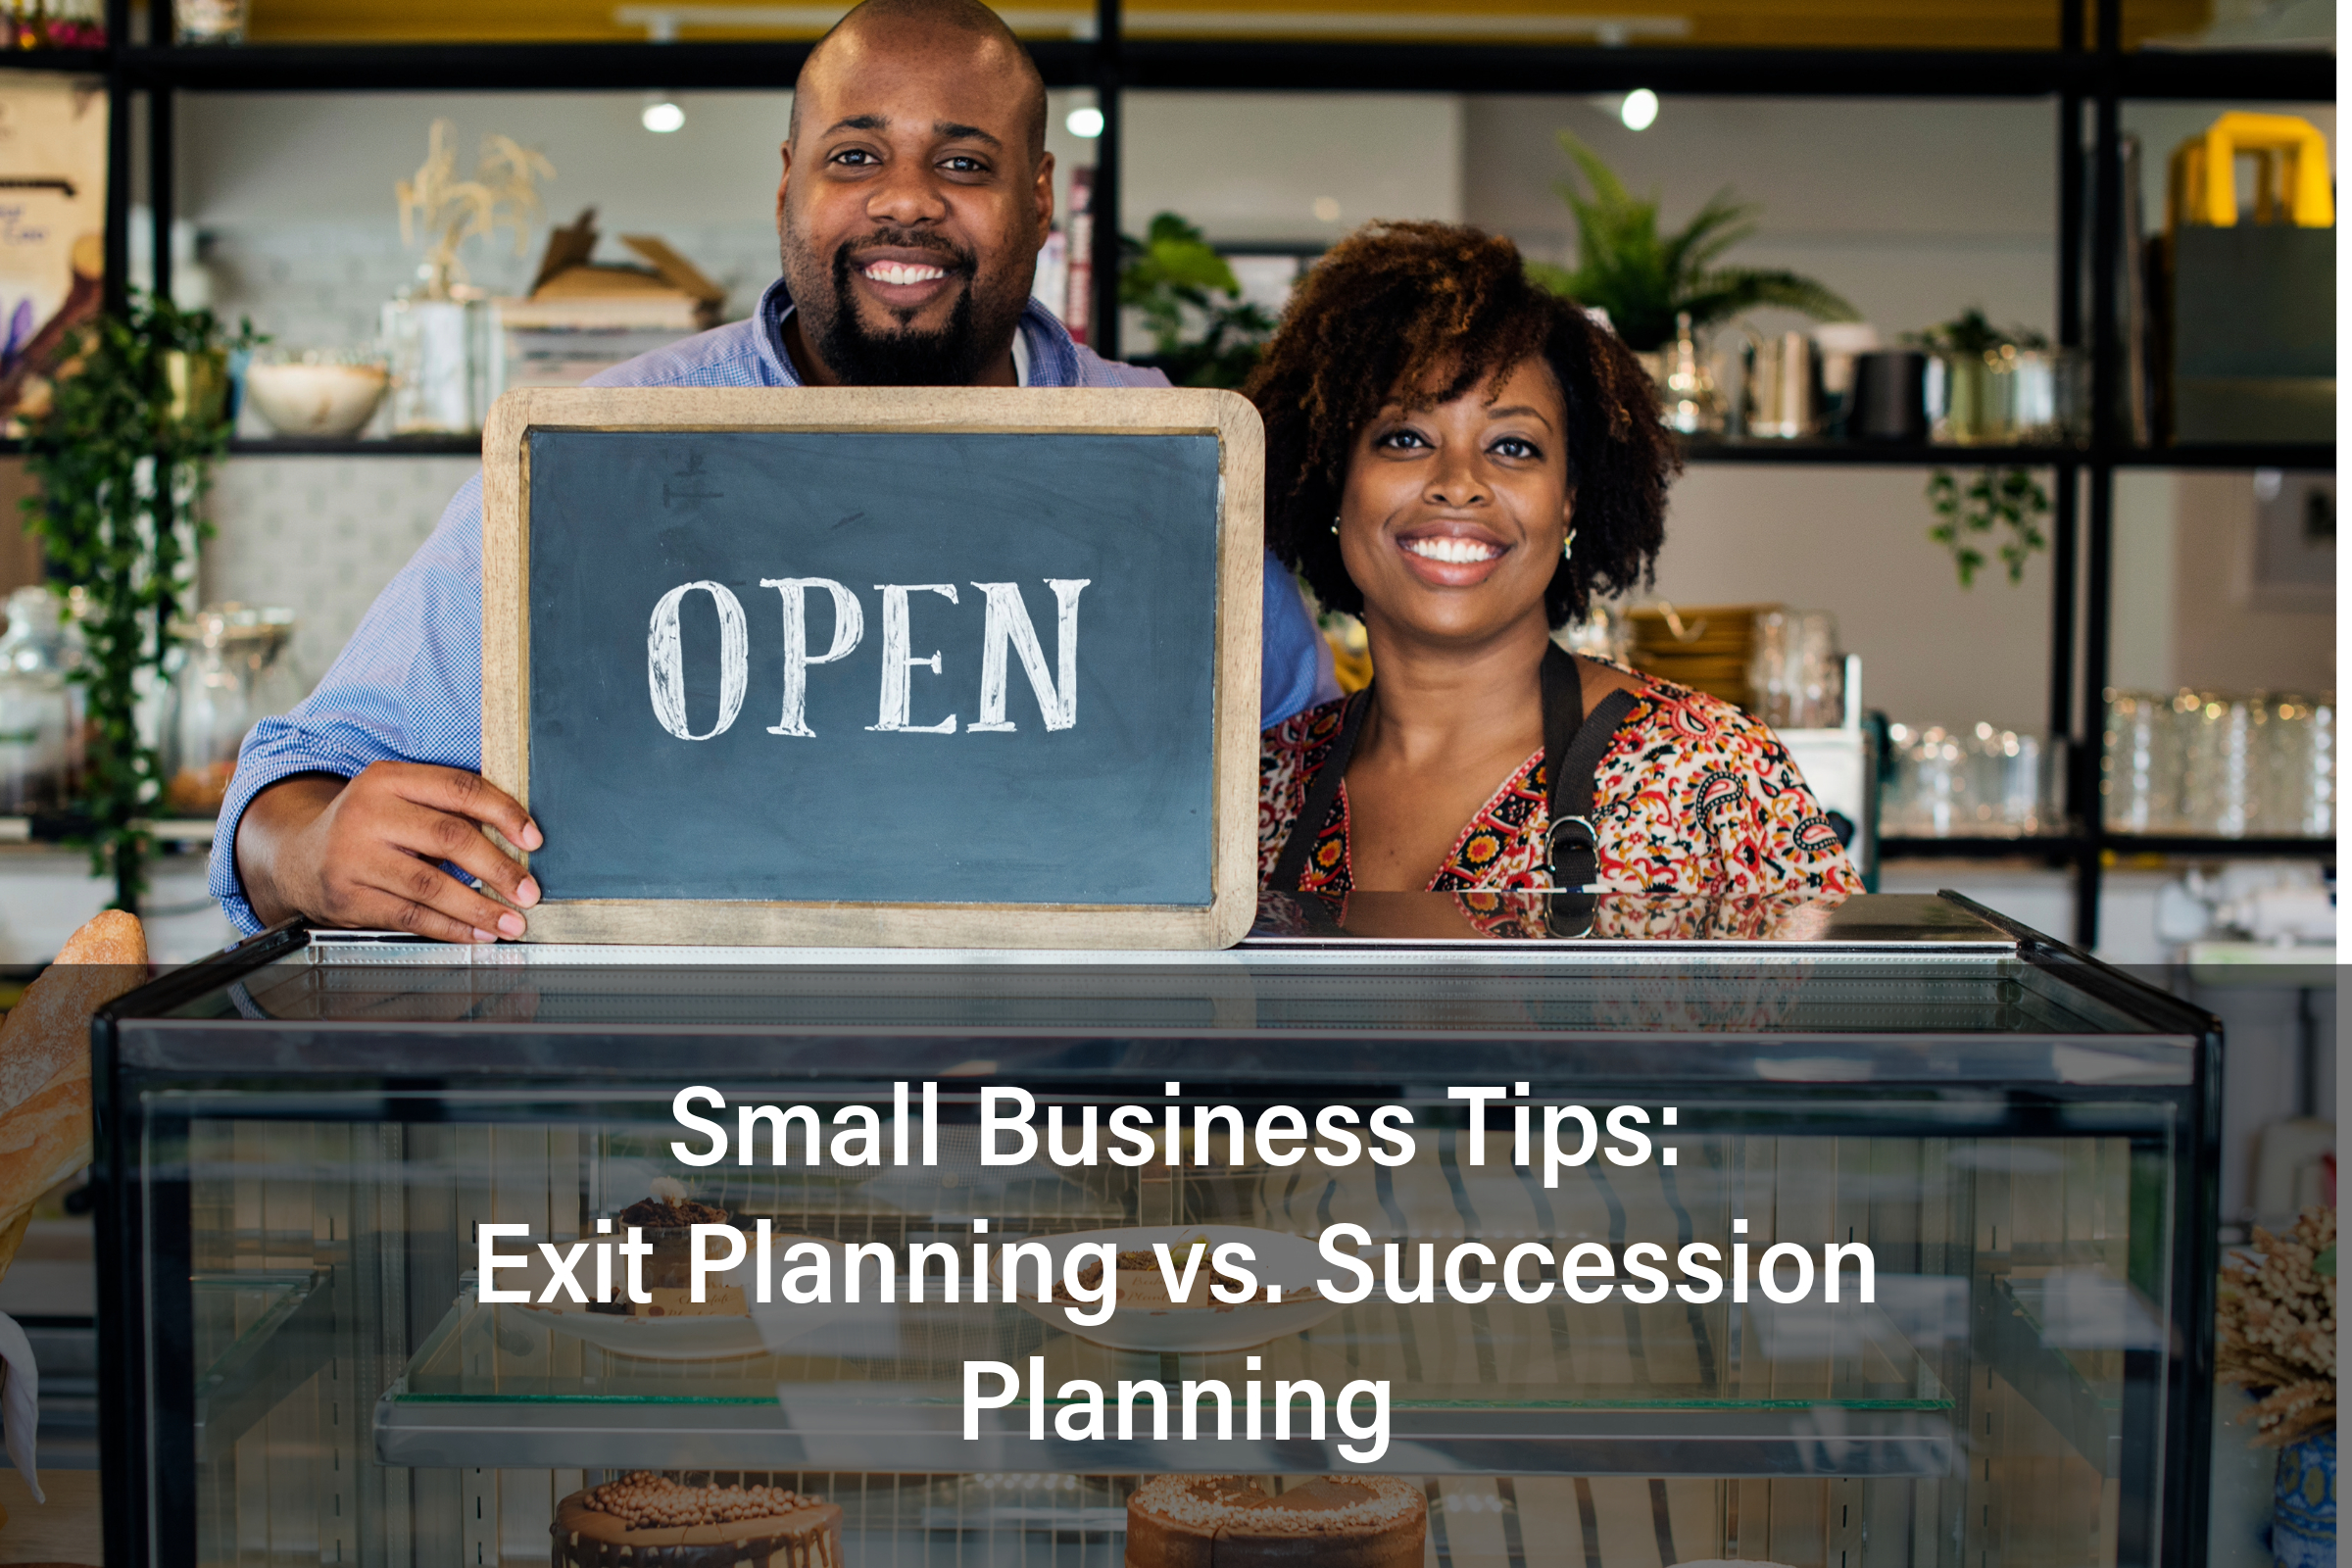 Small Business Tips: Exit Planning vs. Succession Planning